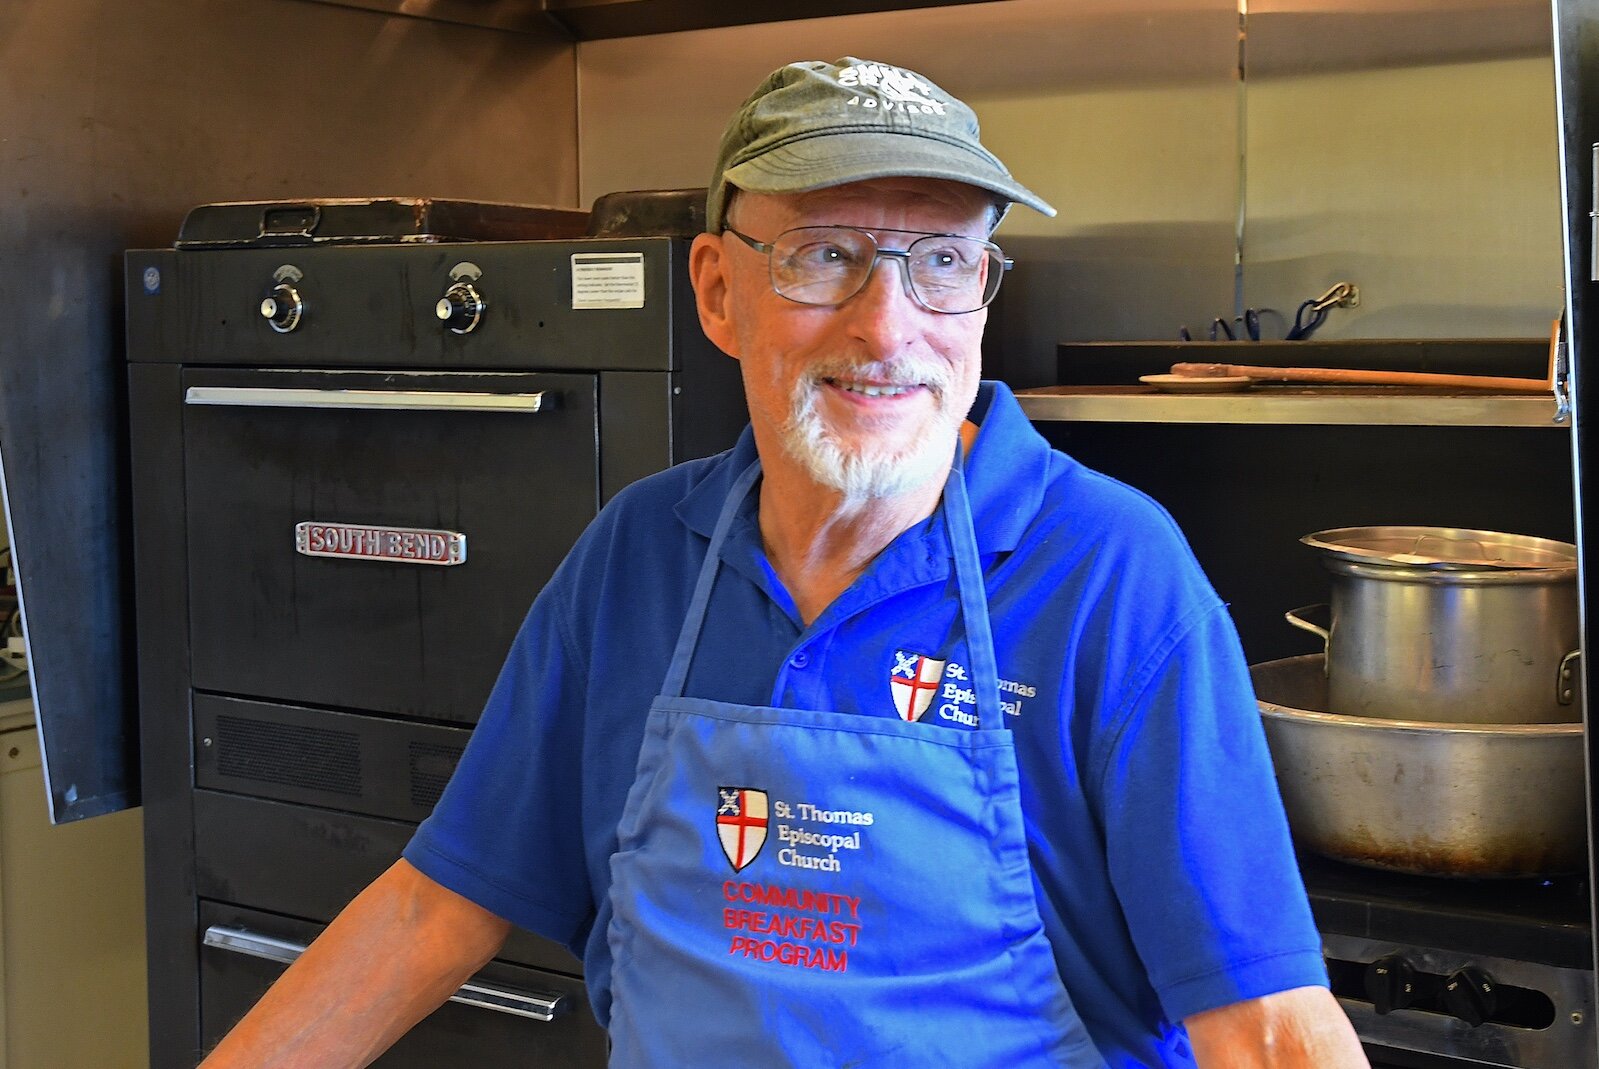 Roy Hillman is one of the lead volunteers for St. Thomas Episcopal Church’s parish breakfast program.